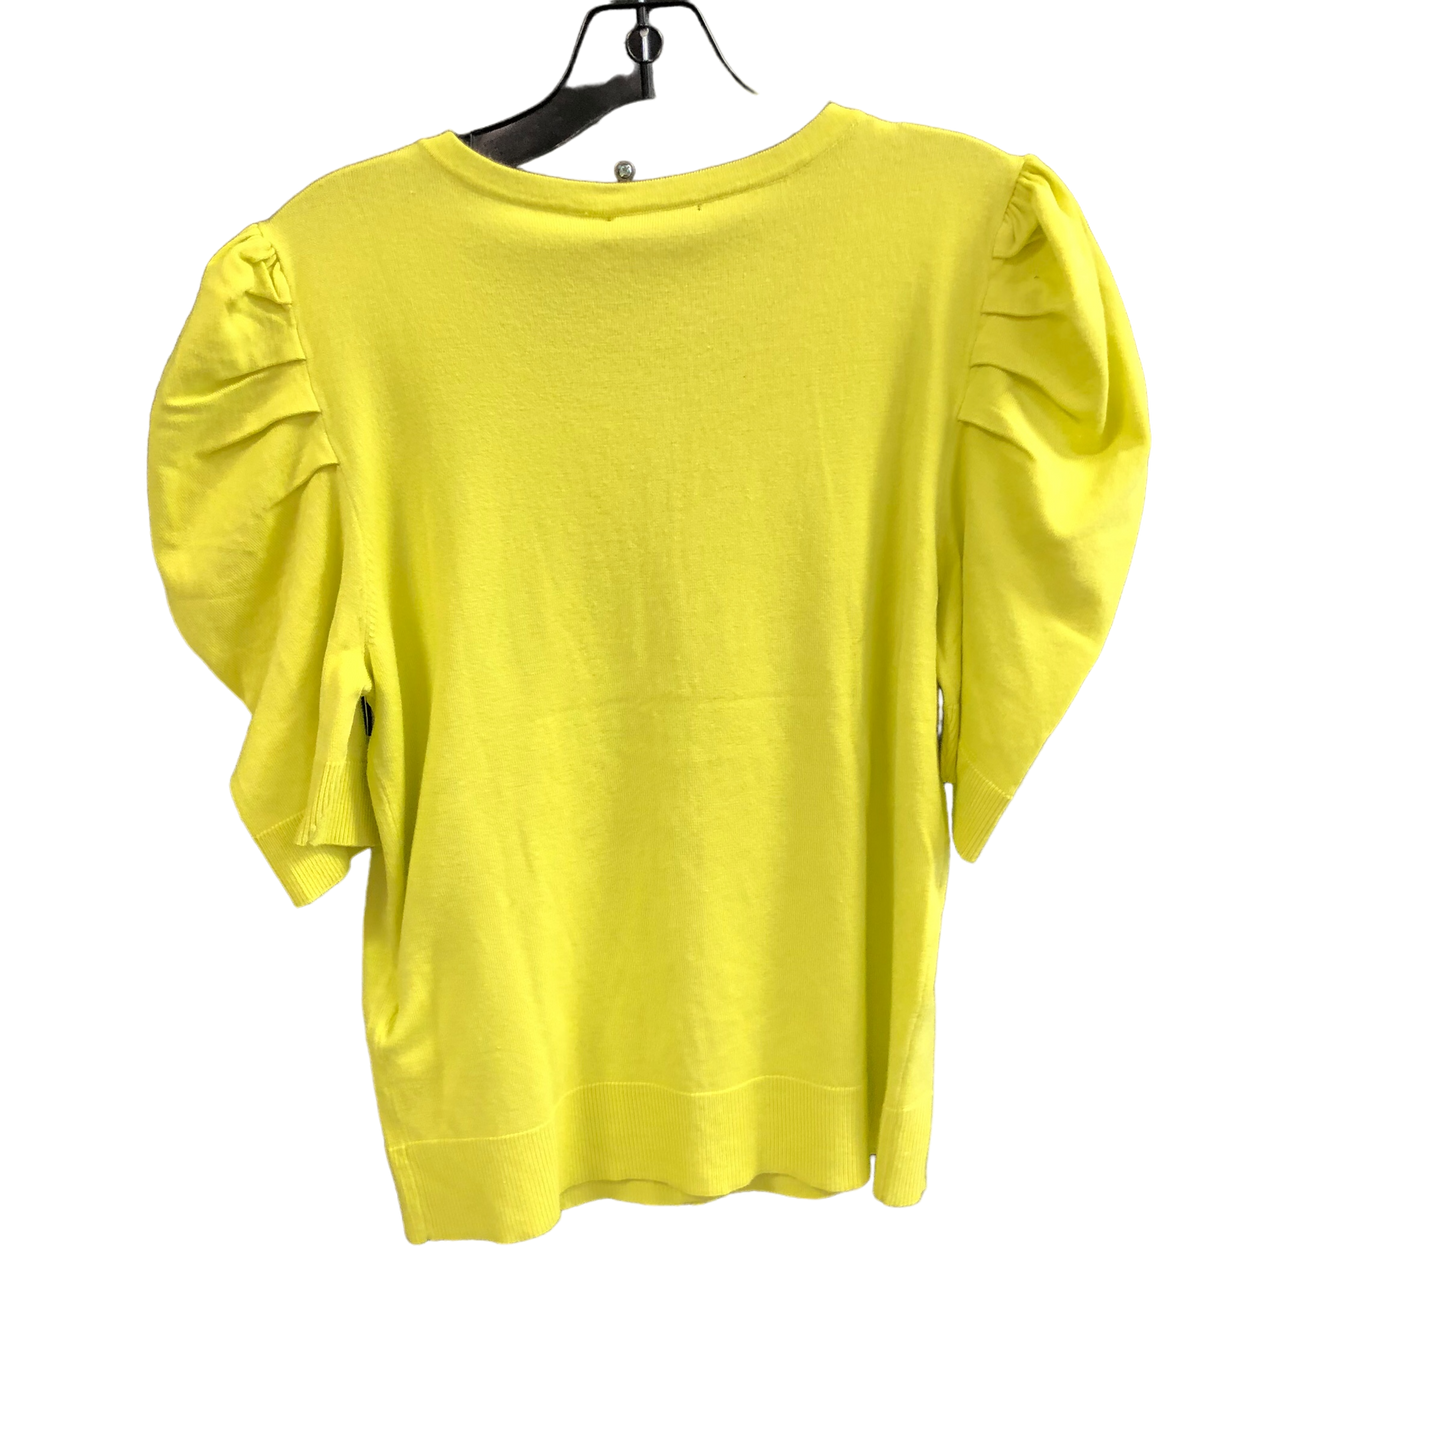 Yellow Sweater Short Sleeve New York And Co, Size M